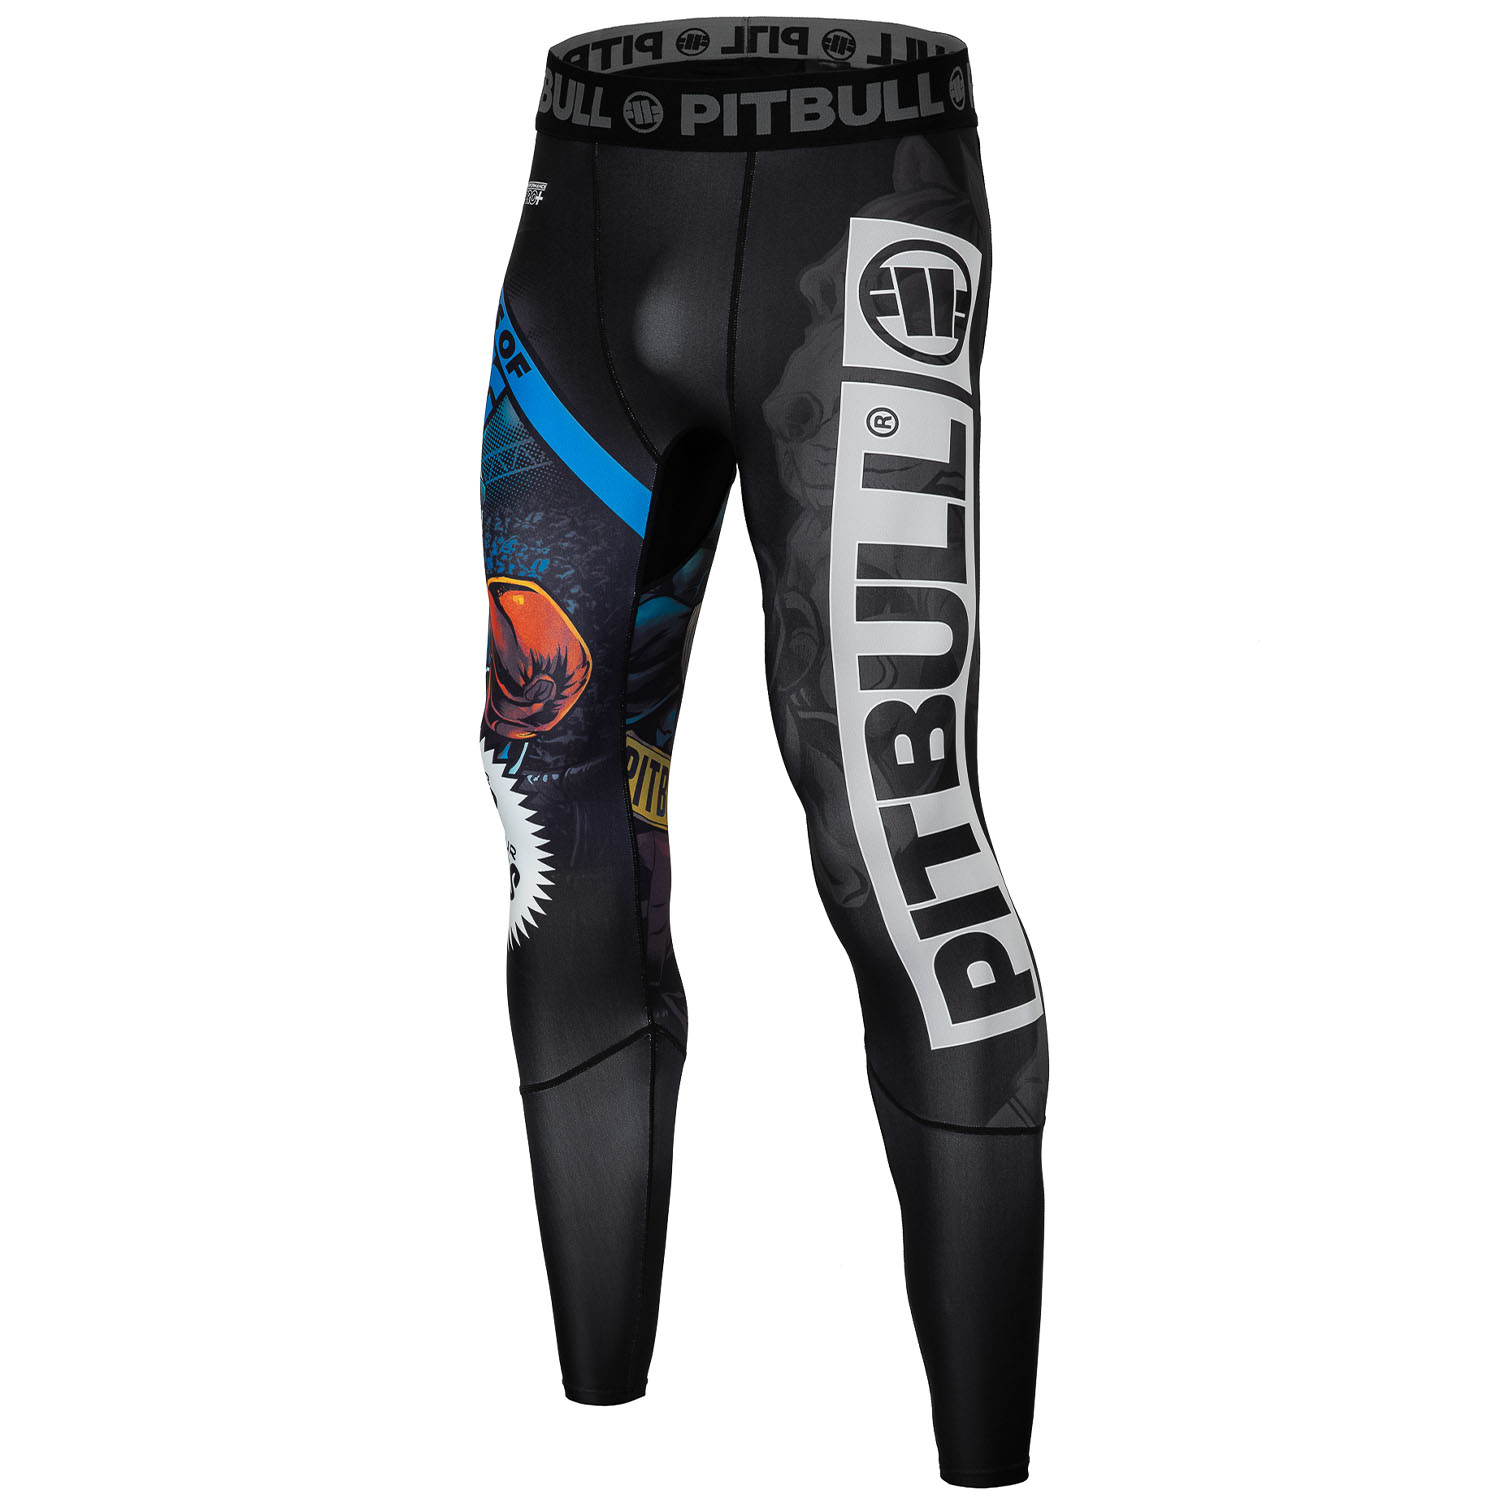 Pit Bull West Coast Compression Pants, Masters Of Boxing, black, S